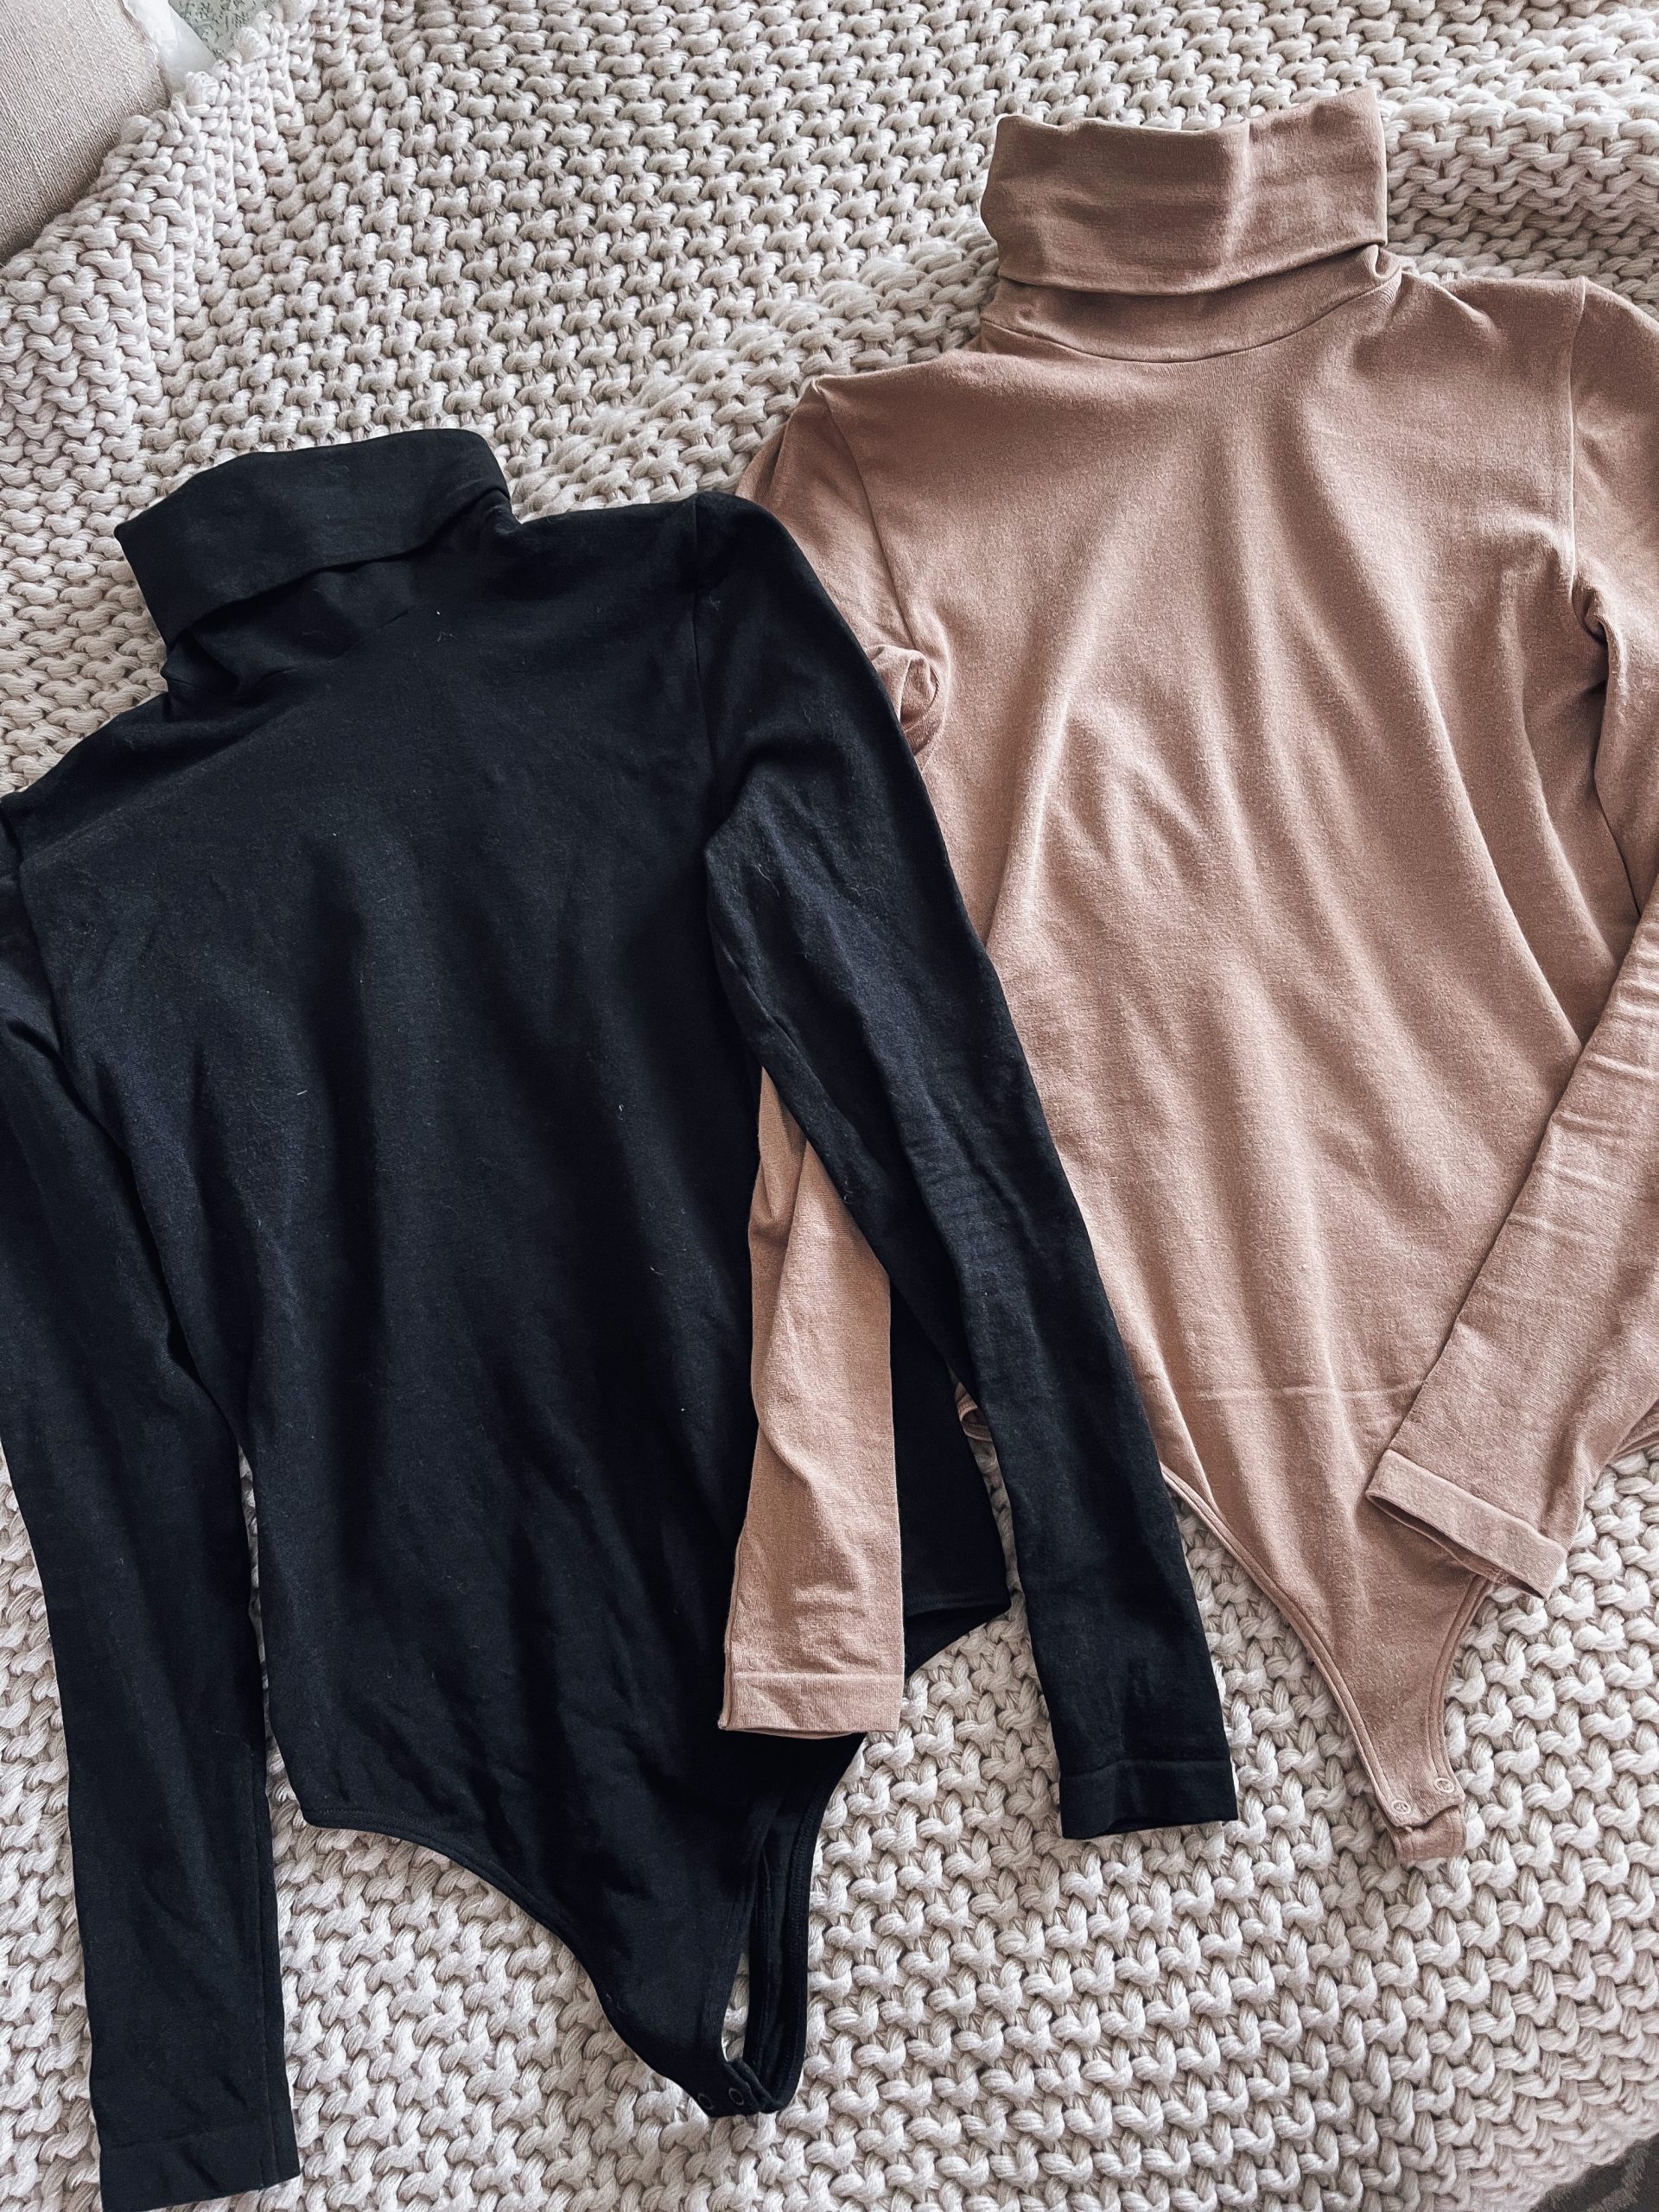 Shopbop Black Friday Sale Event: Recent Purchases & Closet Staples Up to  30% Off - Meagan's Moda